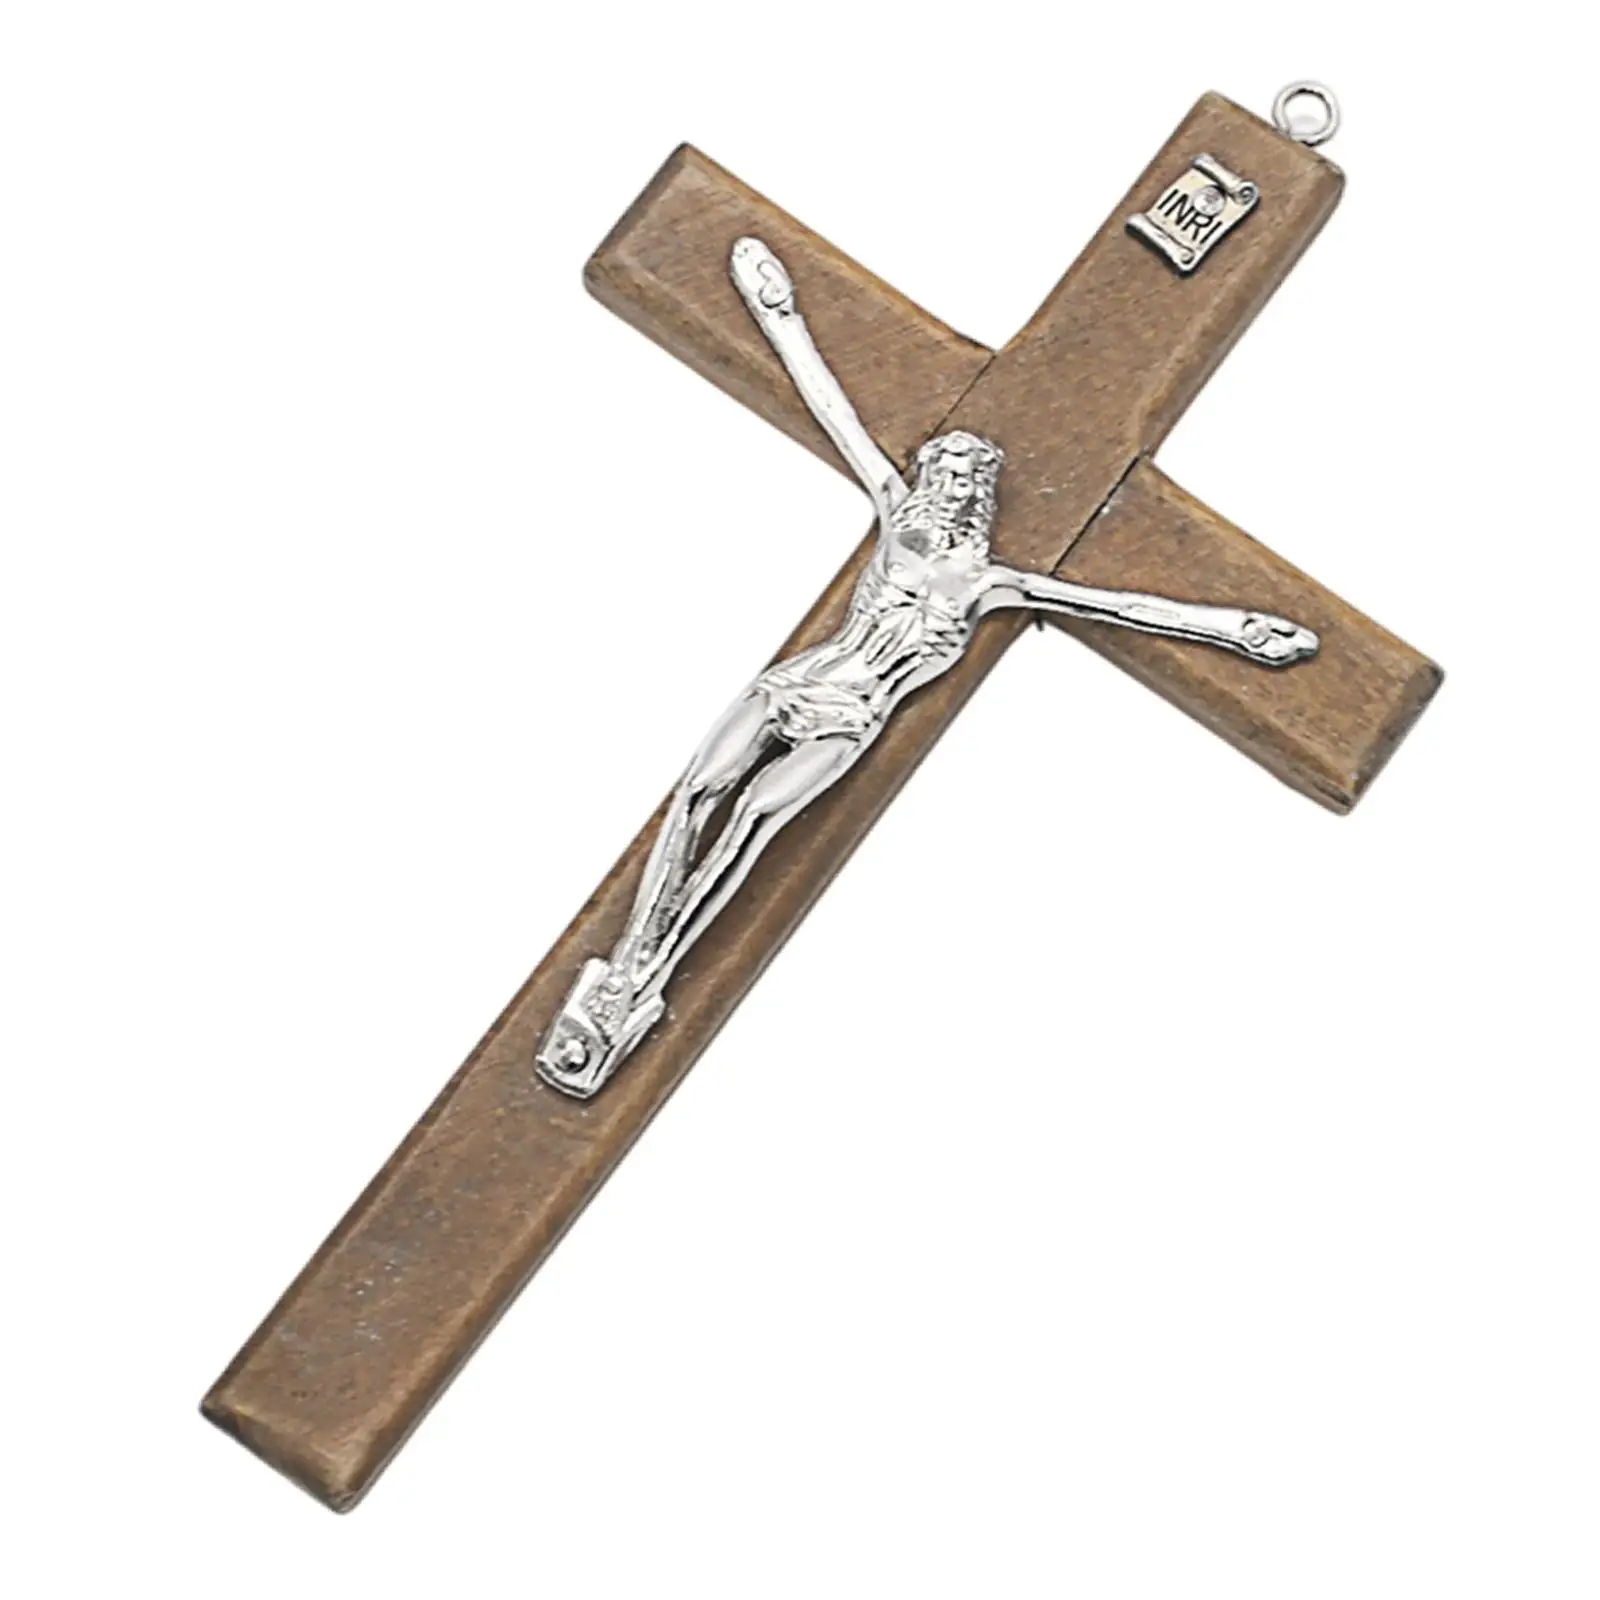 Fashion Crucifix Pendant Small Cross Charm for DIY Necklace DIY Gift Handmade Craft Accessories